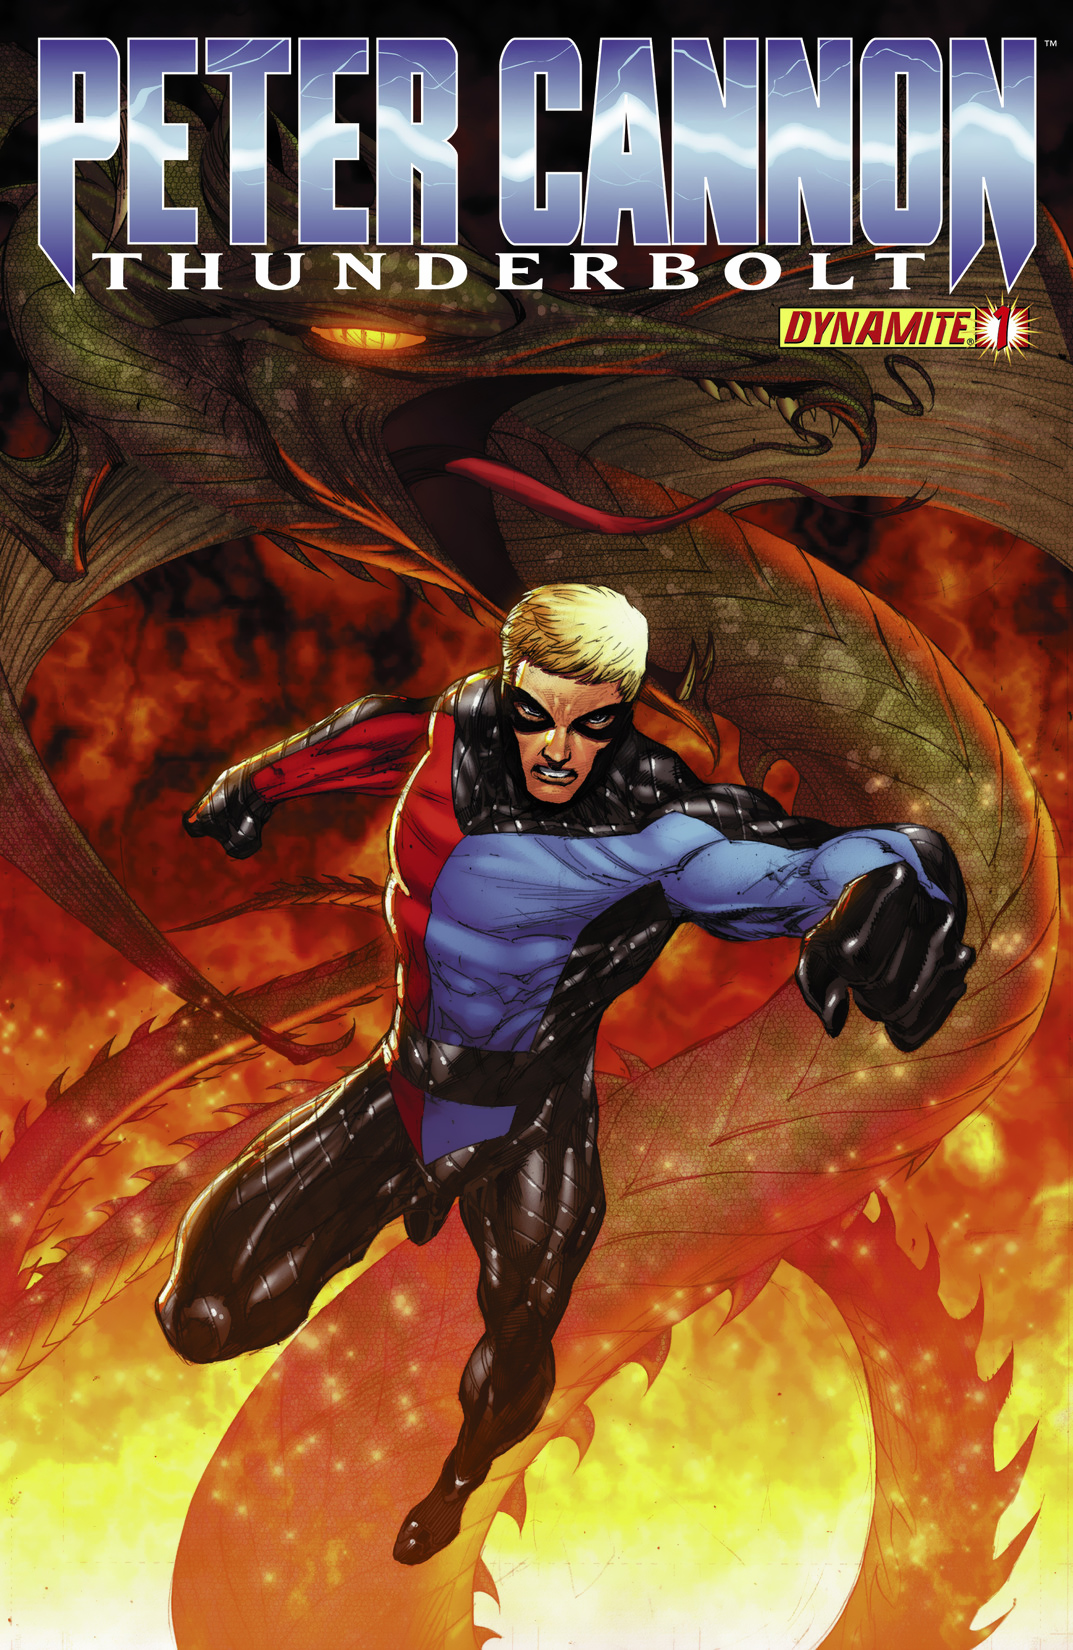 Read online Peter Cannon: Thunderbolt comic -  Issue #1 - 4